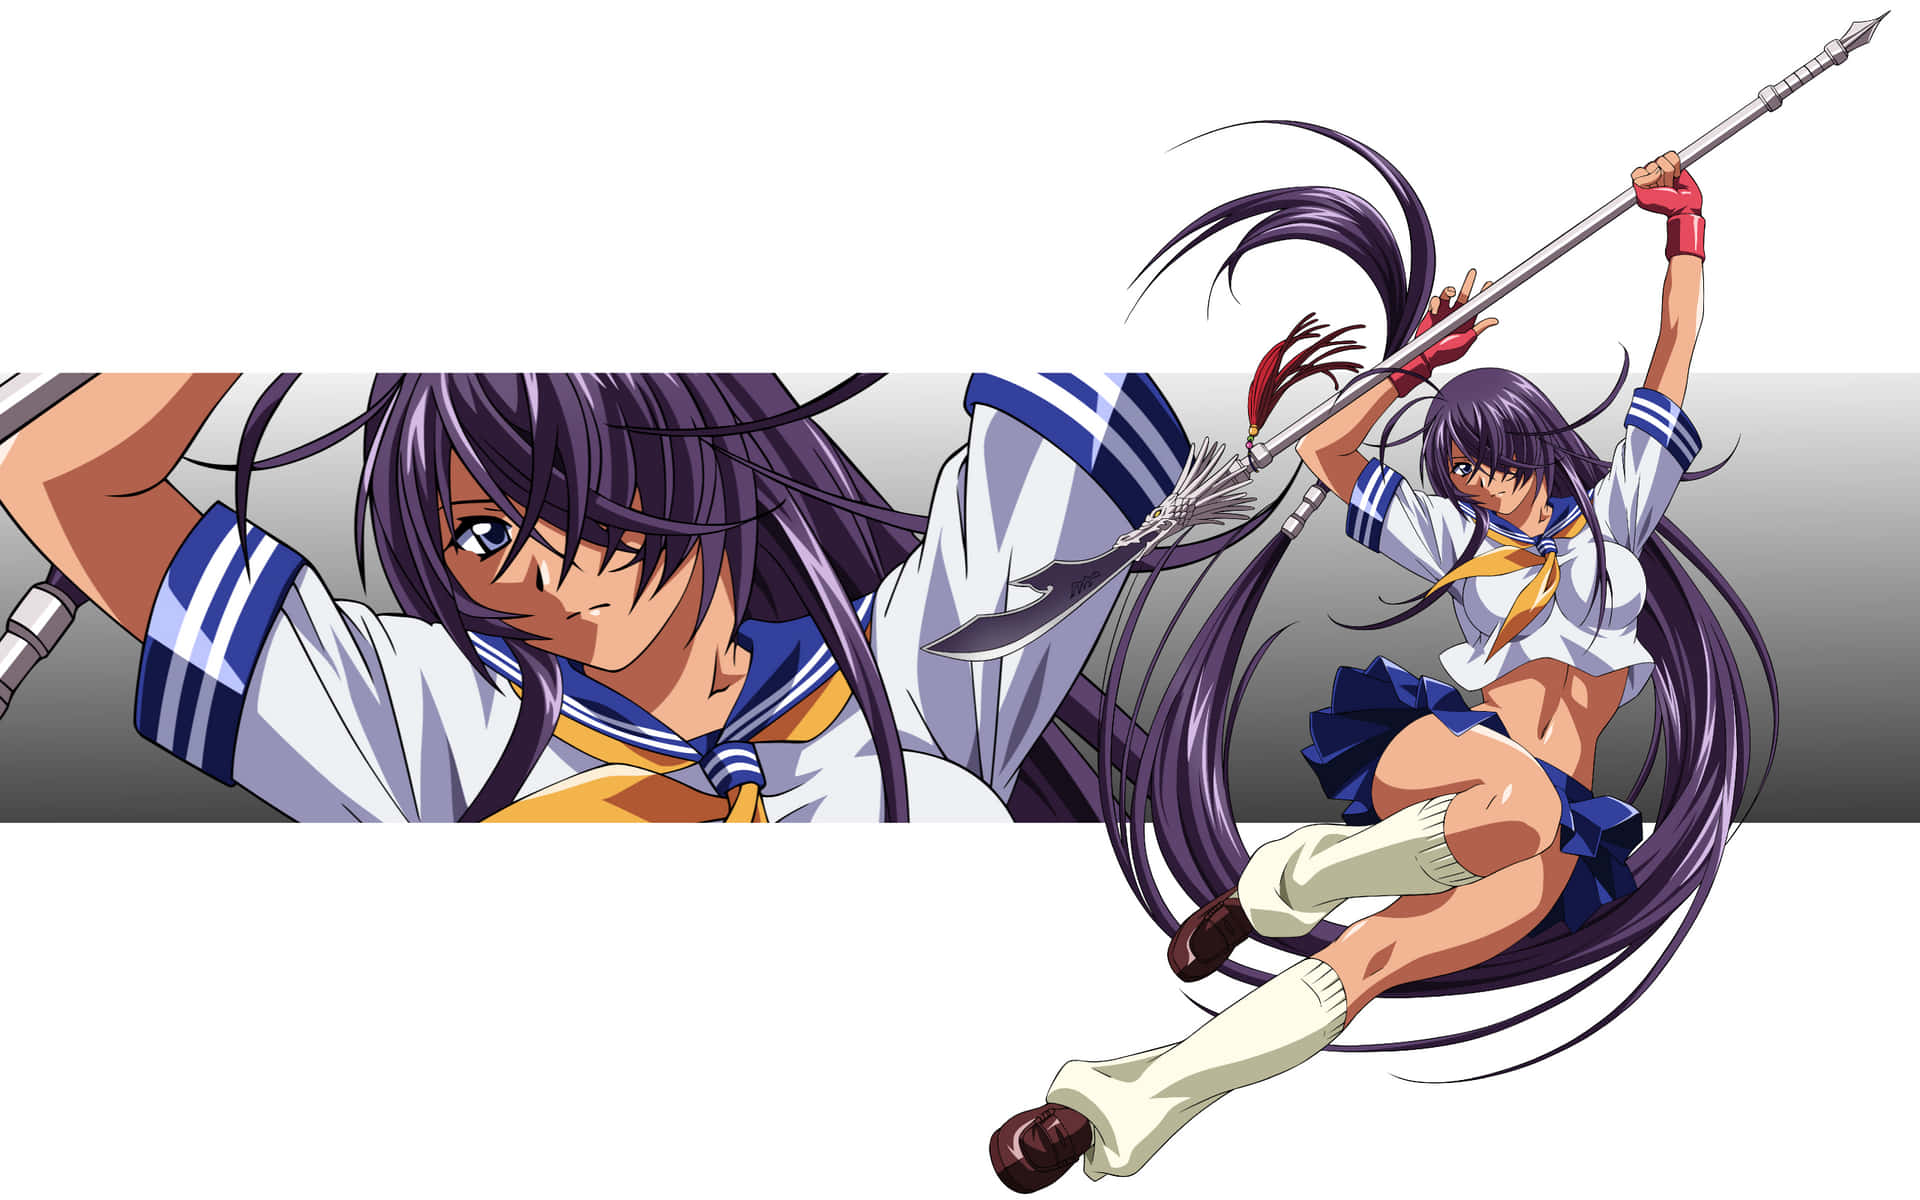 "A battle to the death in an anime classic - Ikki Tousen!" Wallpaper